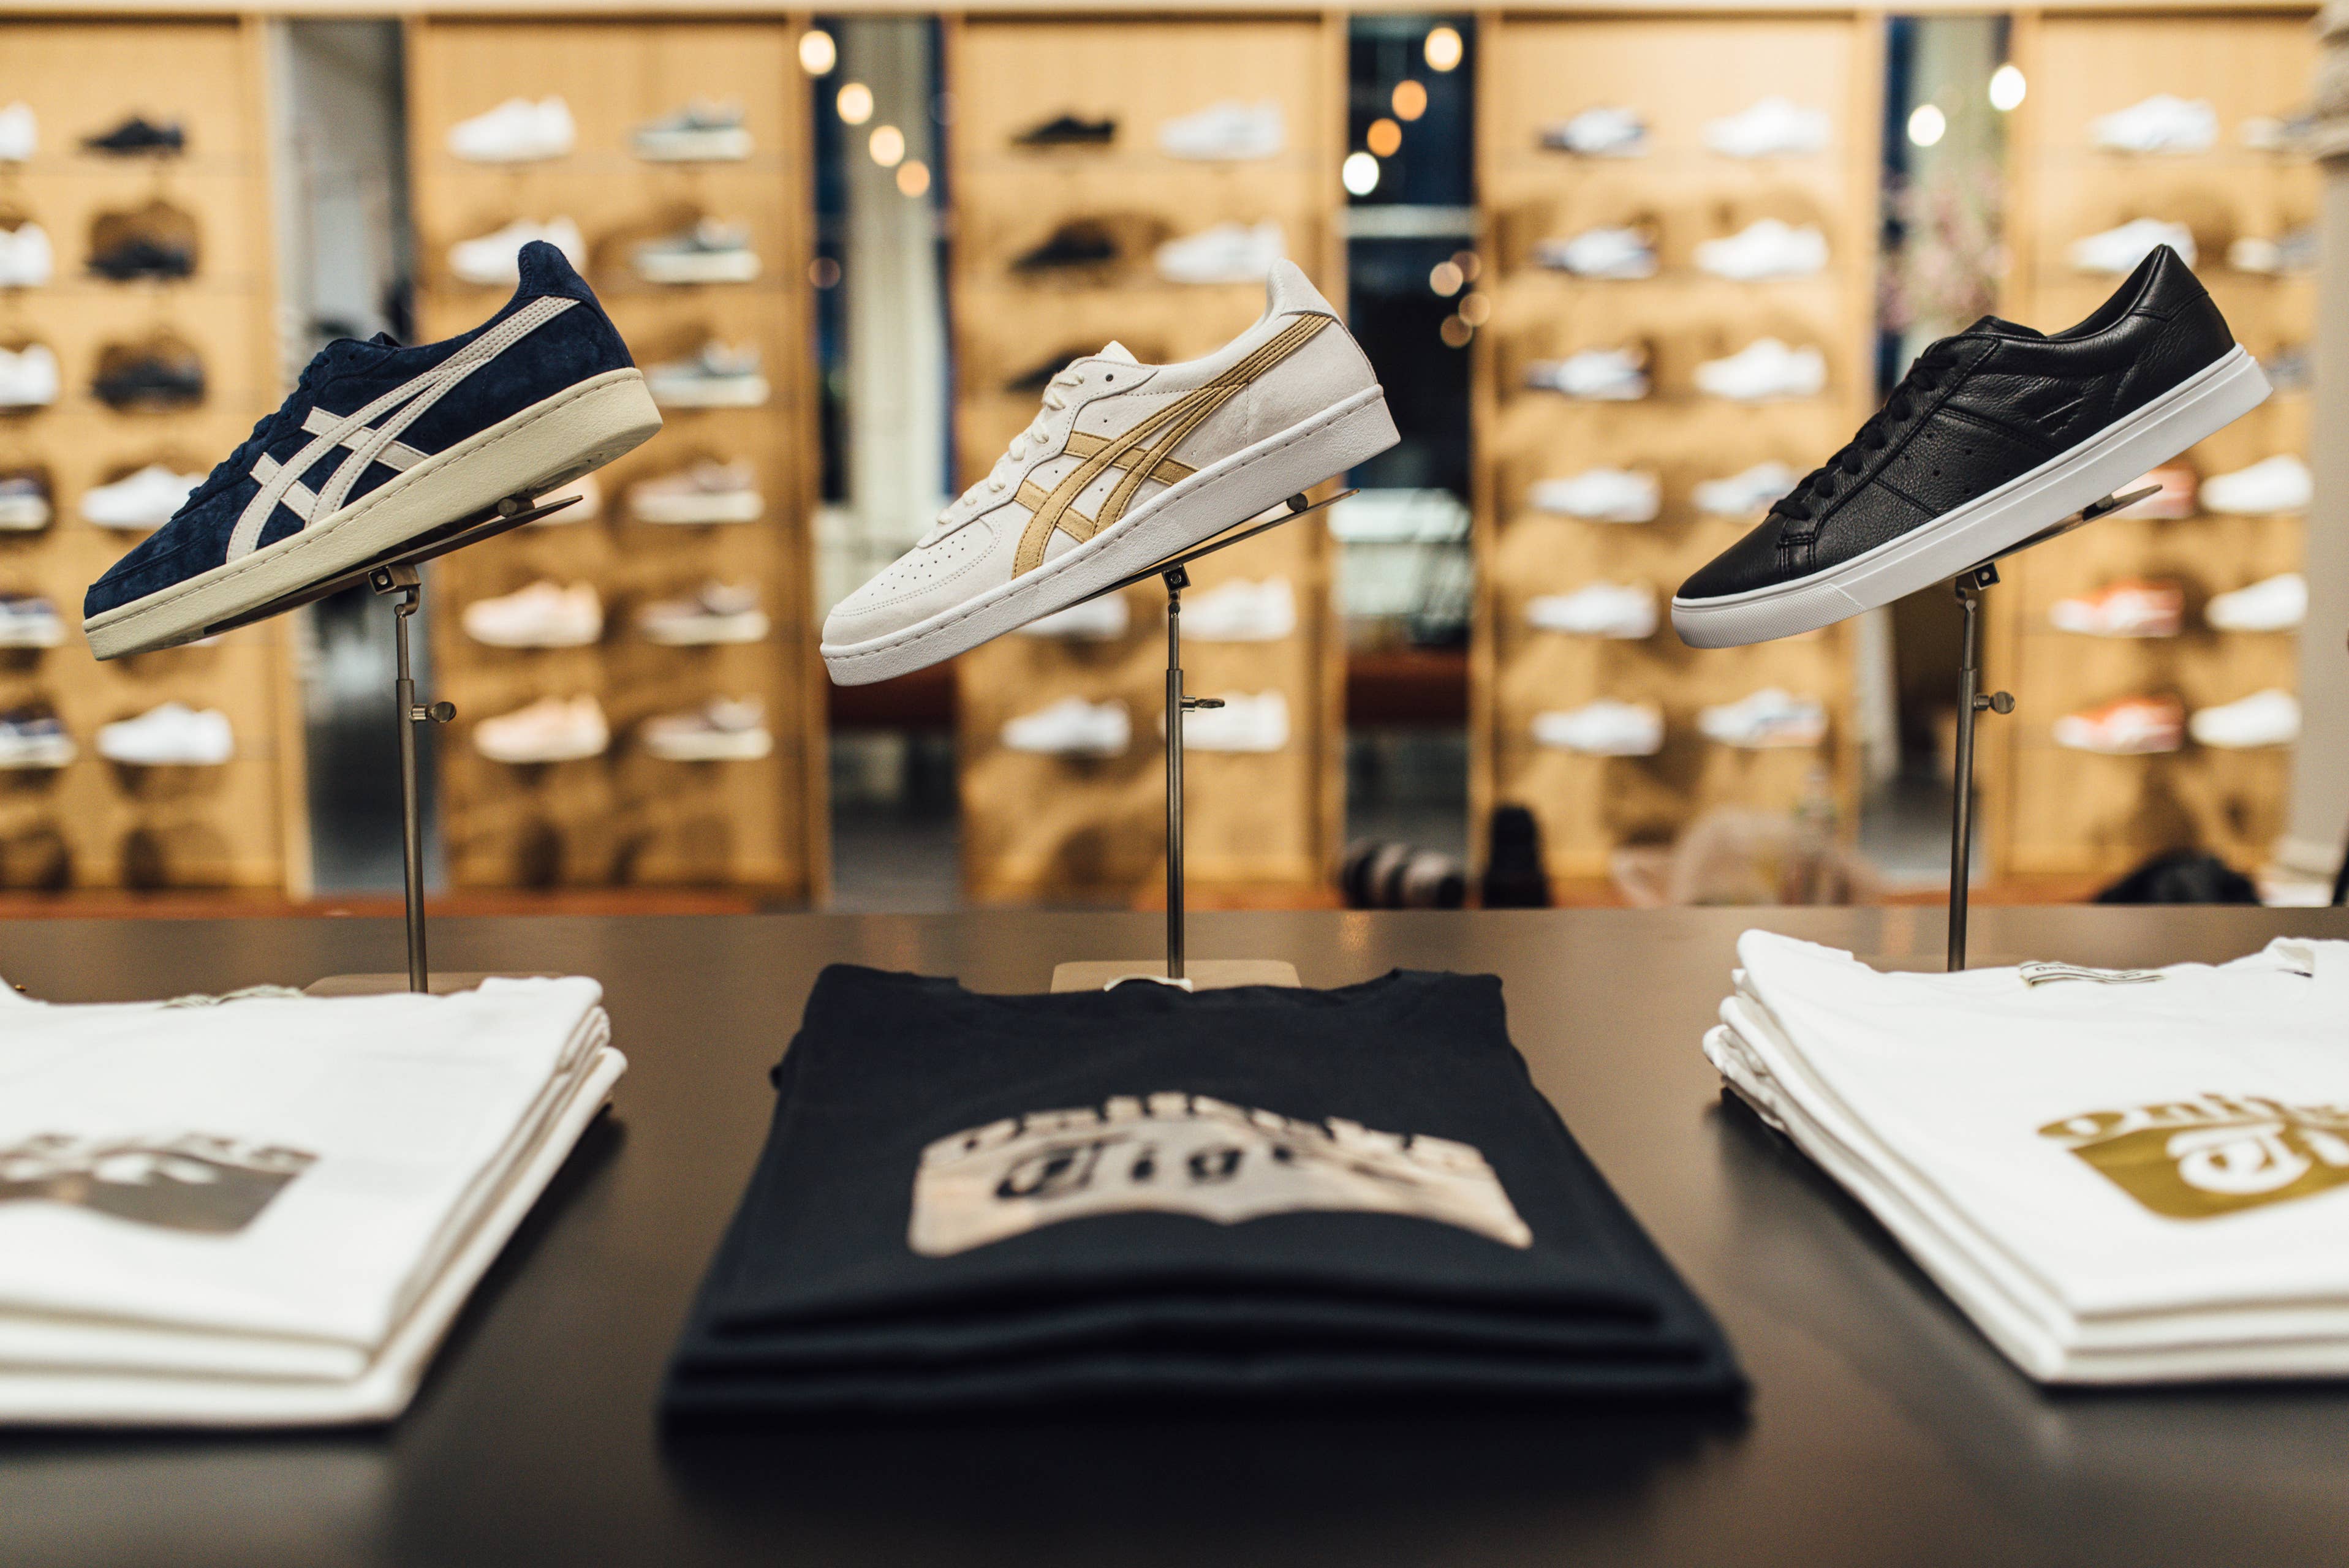 Asics Opens Onitsuka Tiger Pop-Up in New York City